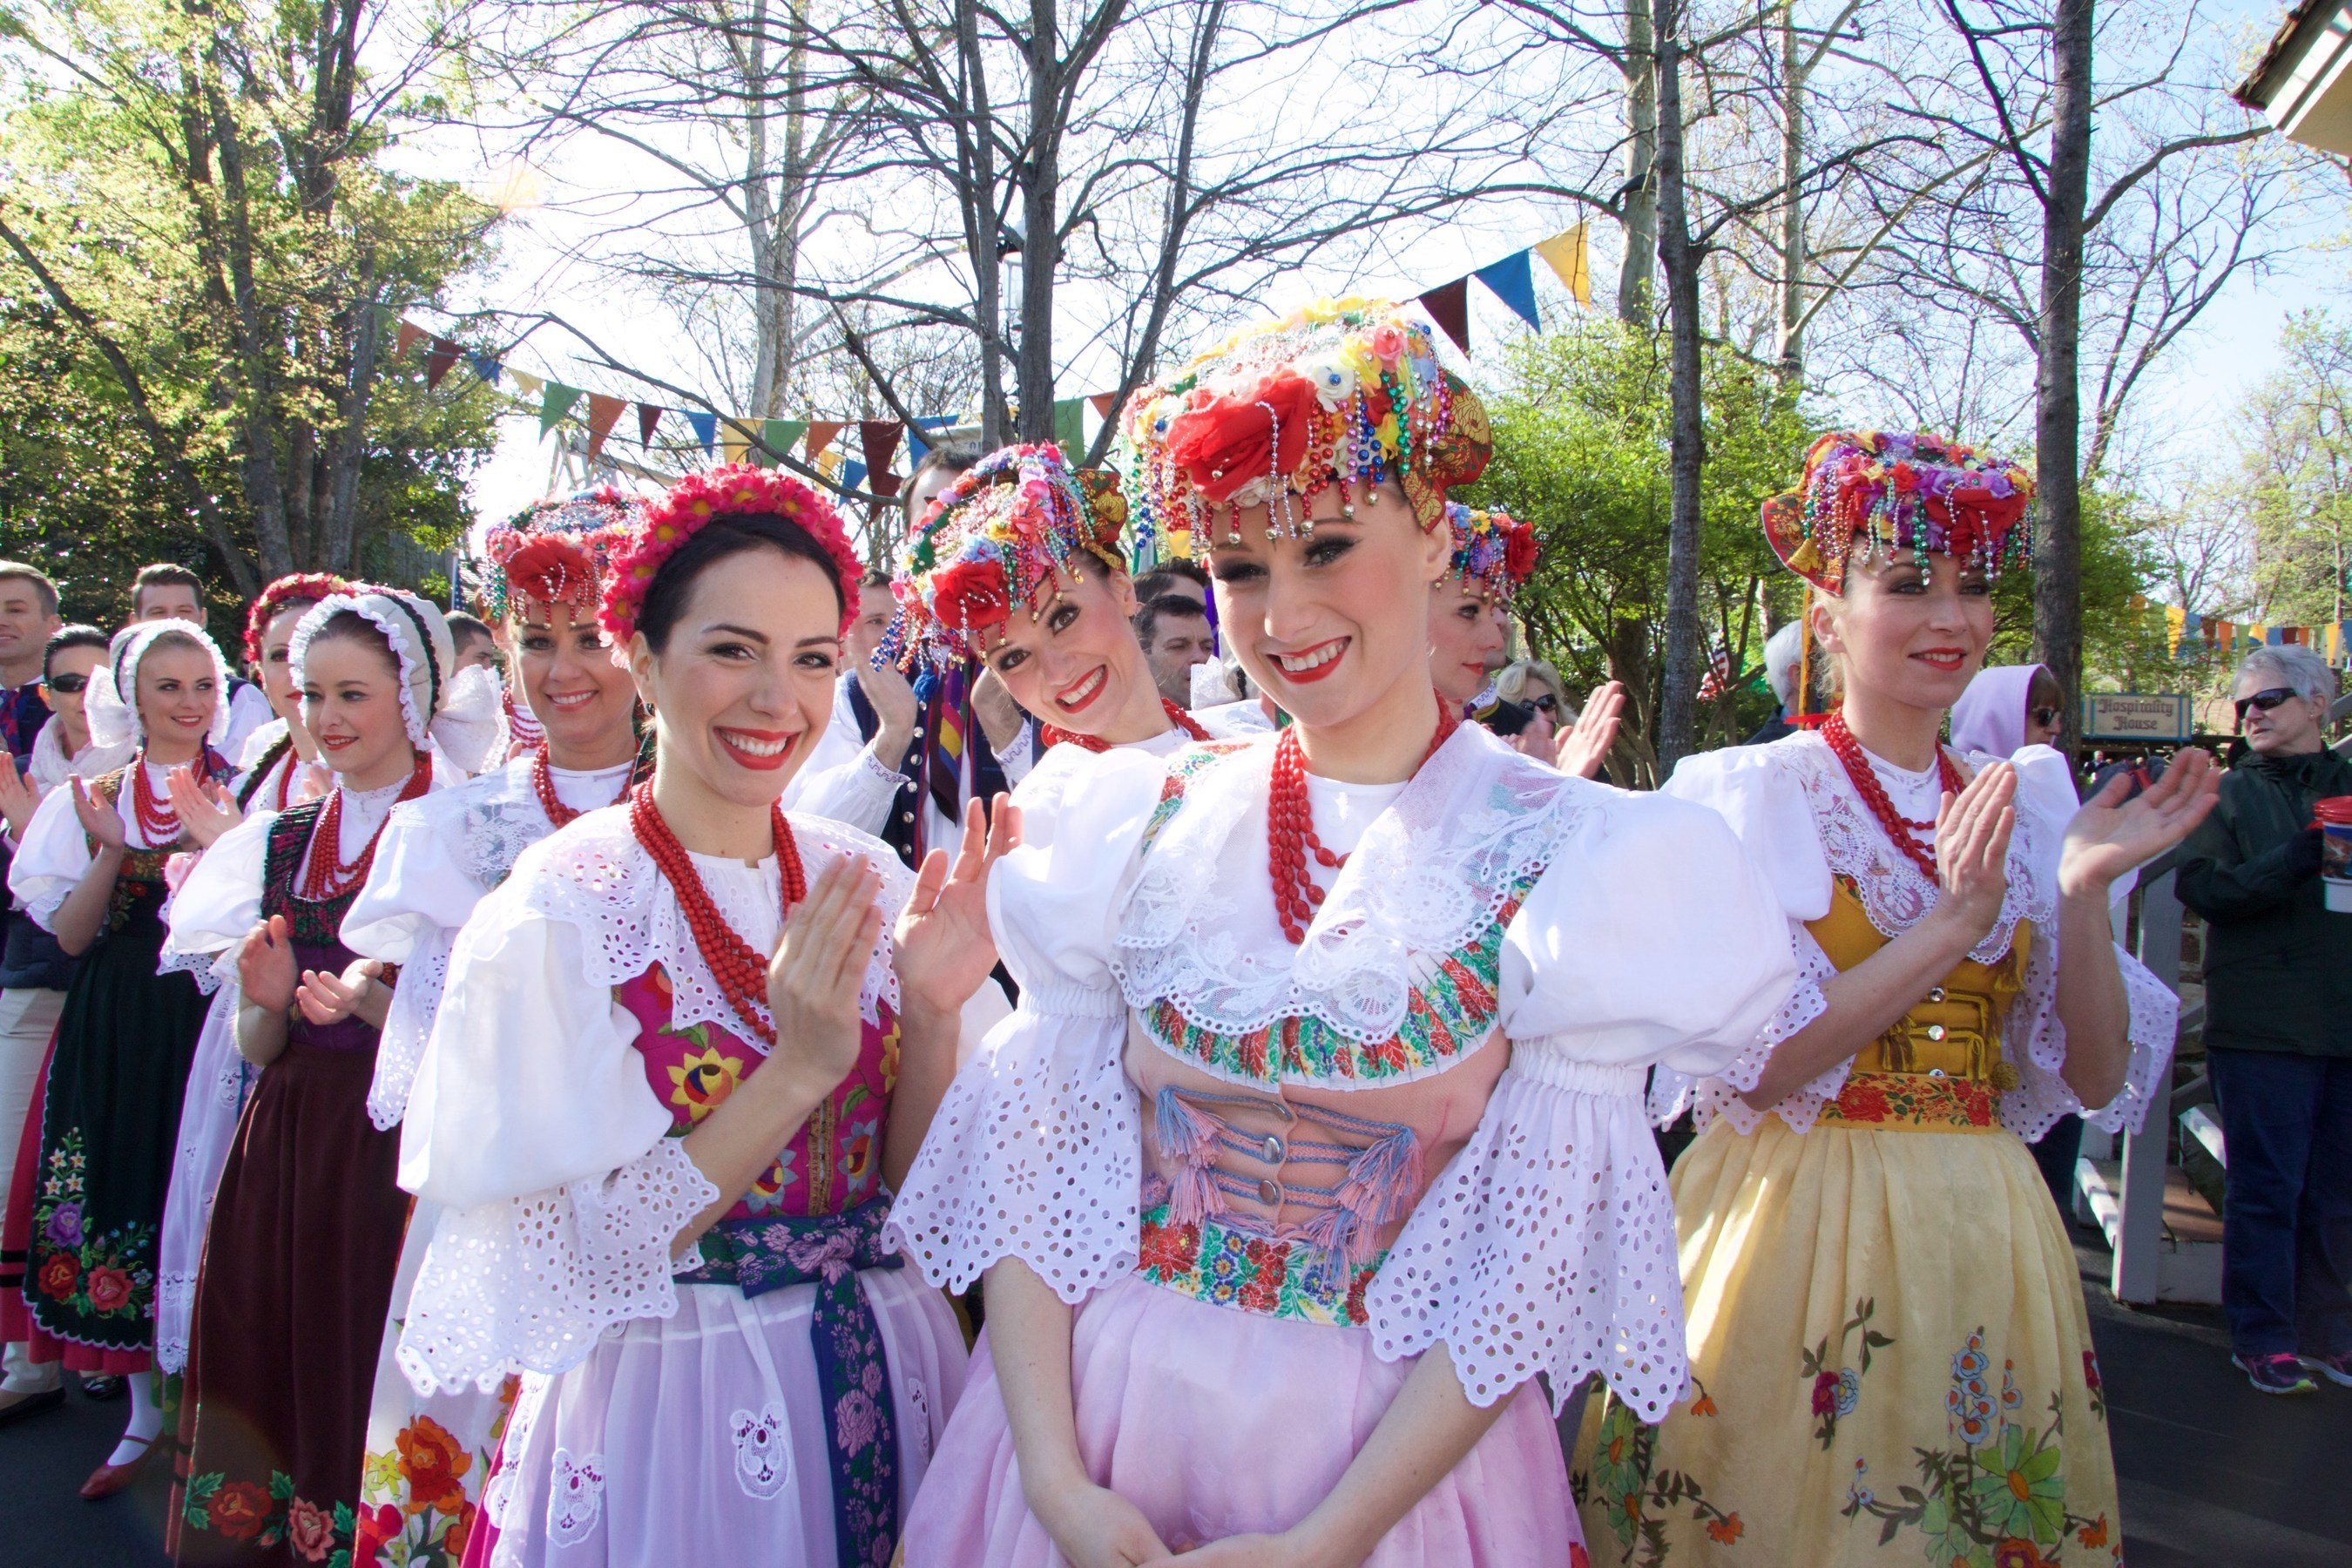 Among the featured shows at Silver Dollar City's World-Fest is Slask, a 35-member music and dance troupe from Poland. Now in its Grand Finale season, World-Fest runs through May 1 at the theme park in Branson, Missouri.